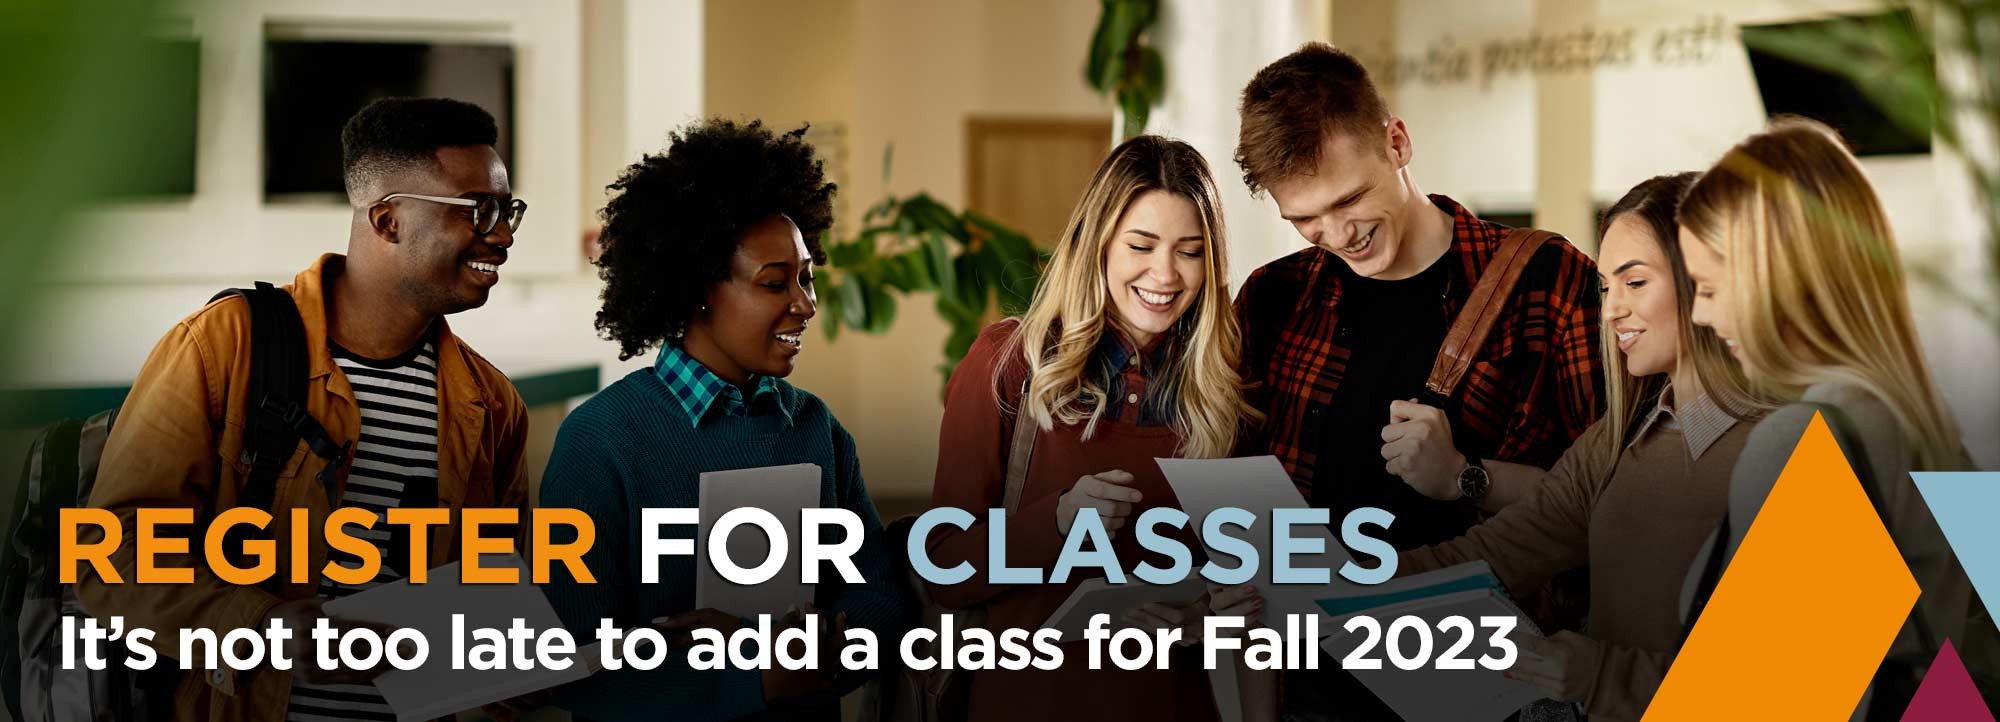 Register for Classes - It's not too late to add a class for Fall 2023